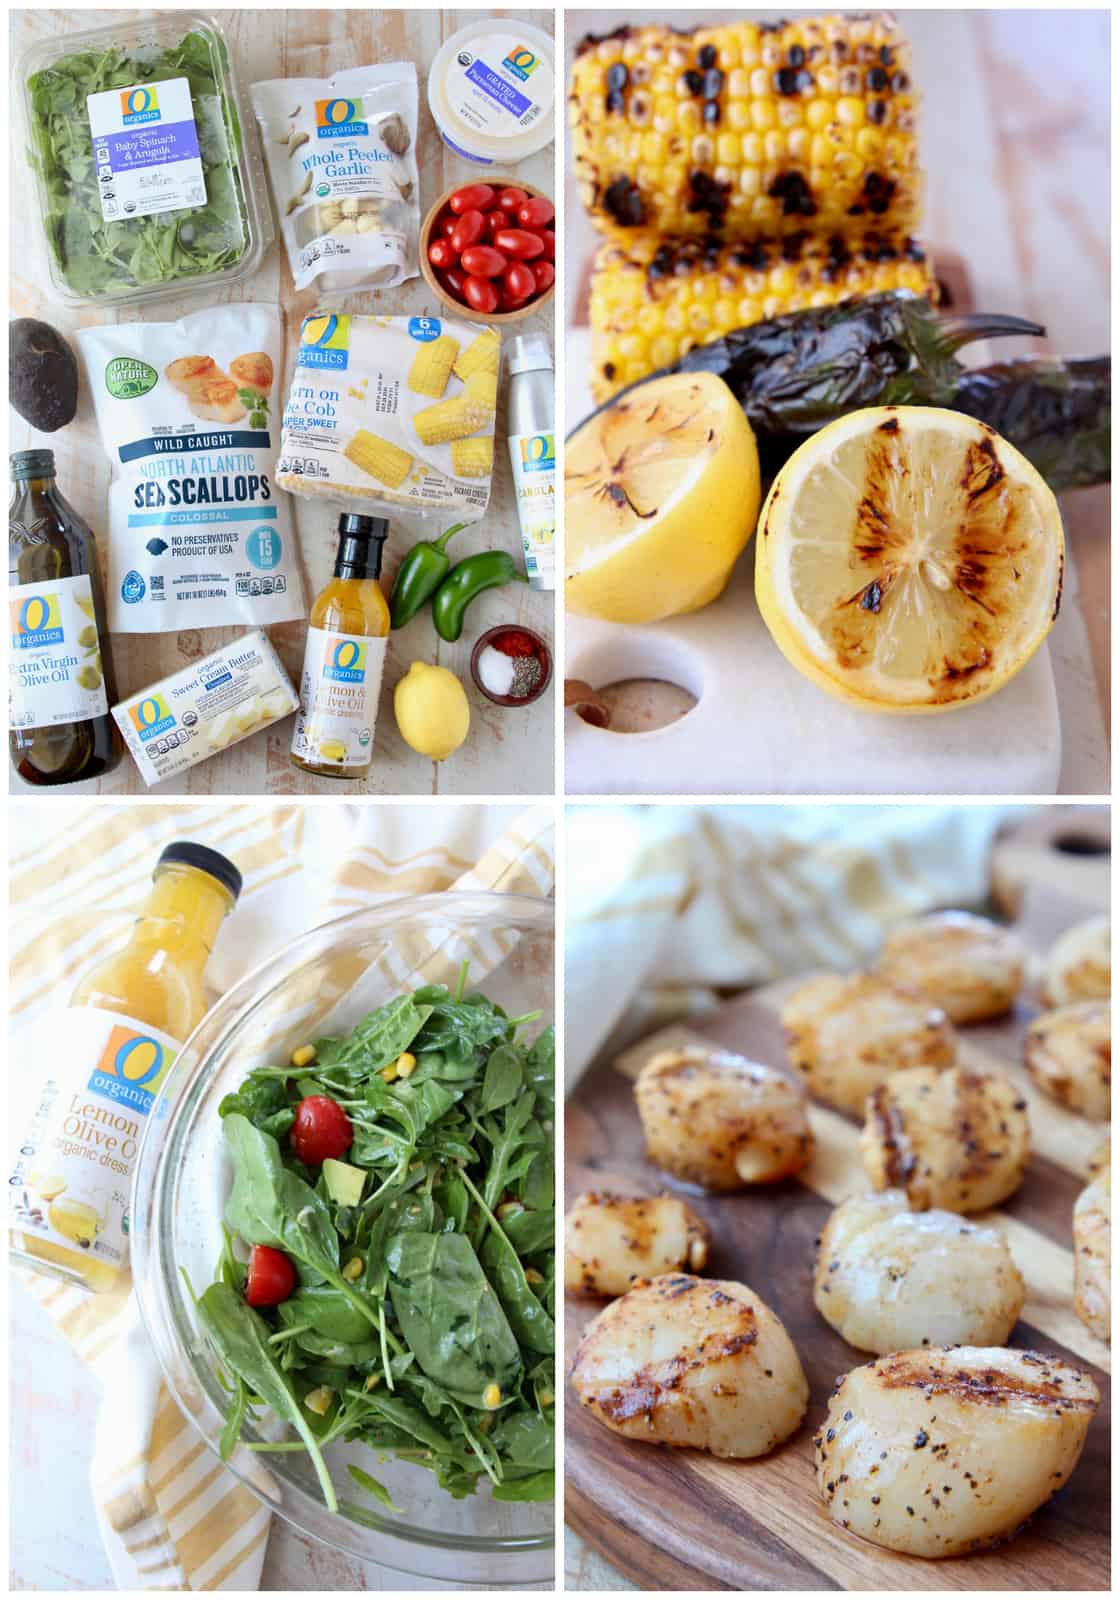 Collage of images showing the ingredients and how to make grilled scallops with a salad